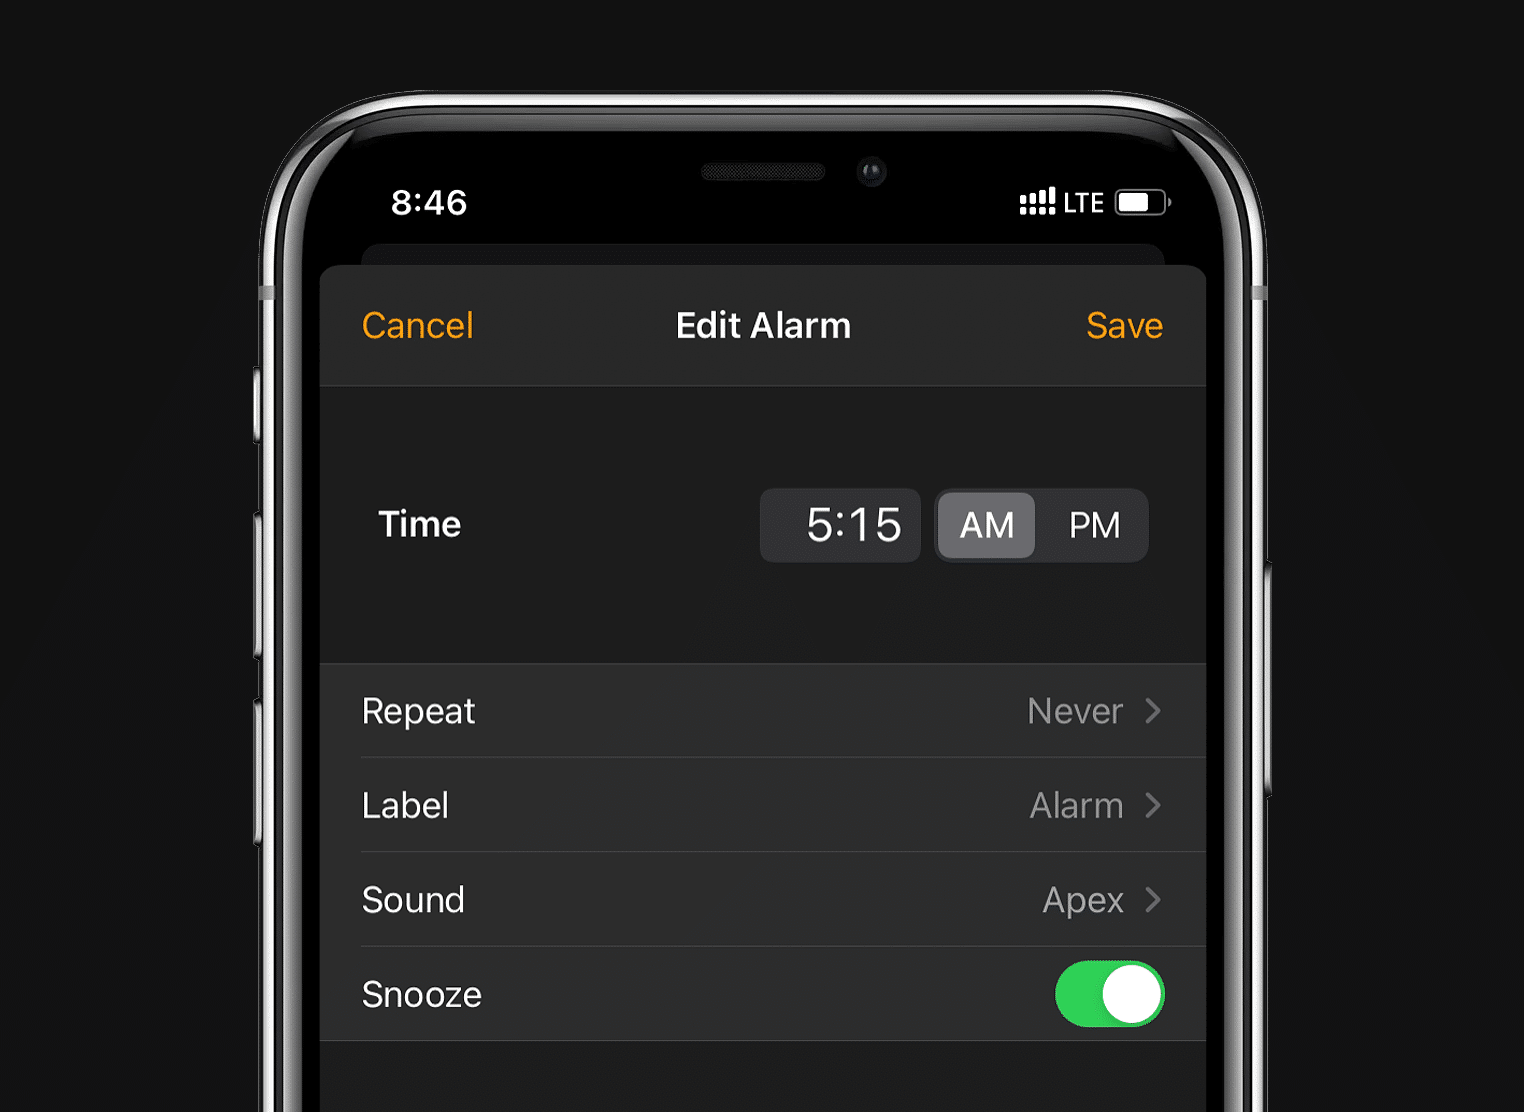 Date Time Picker - iOS 14